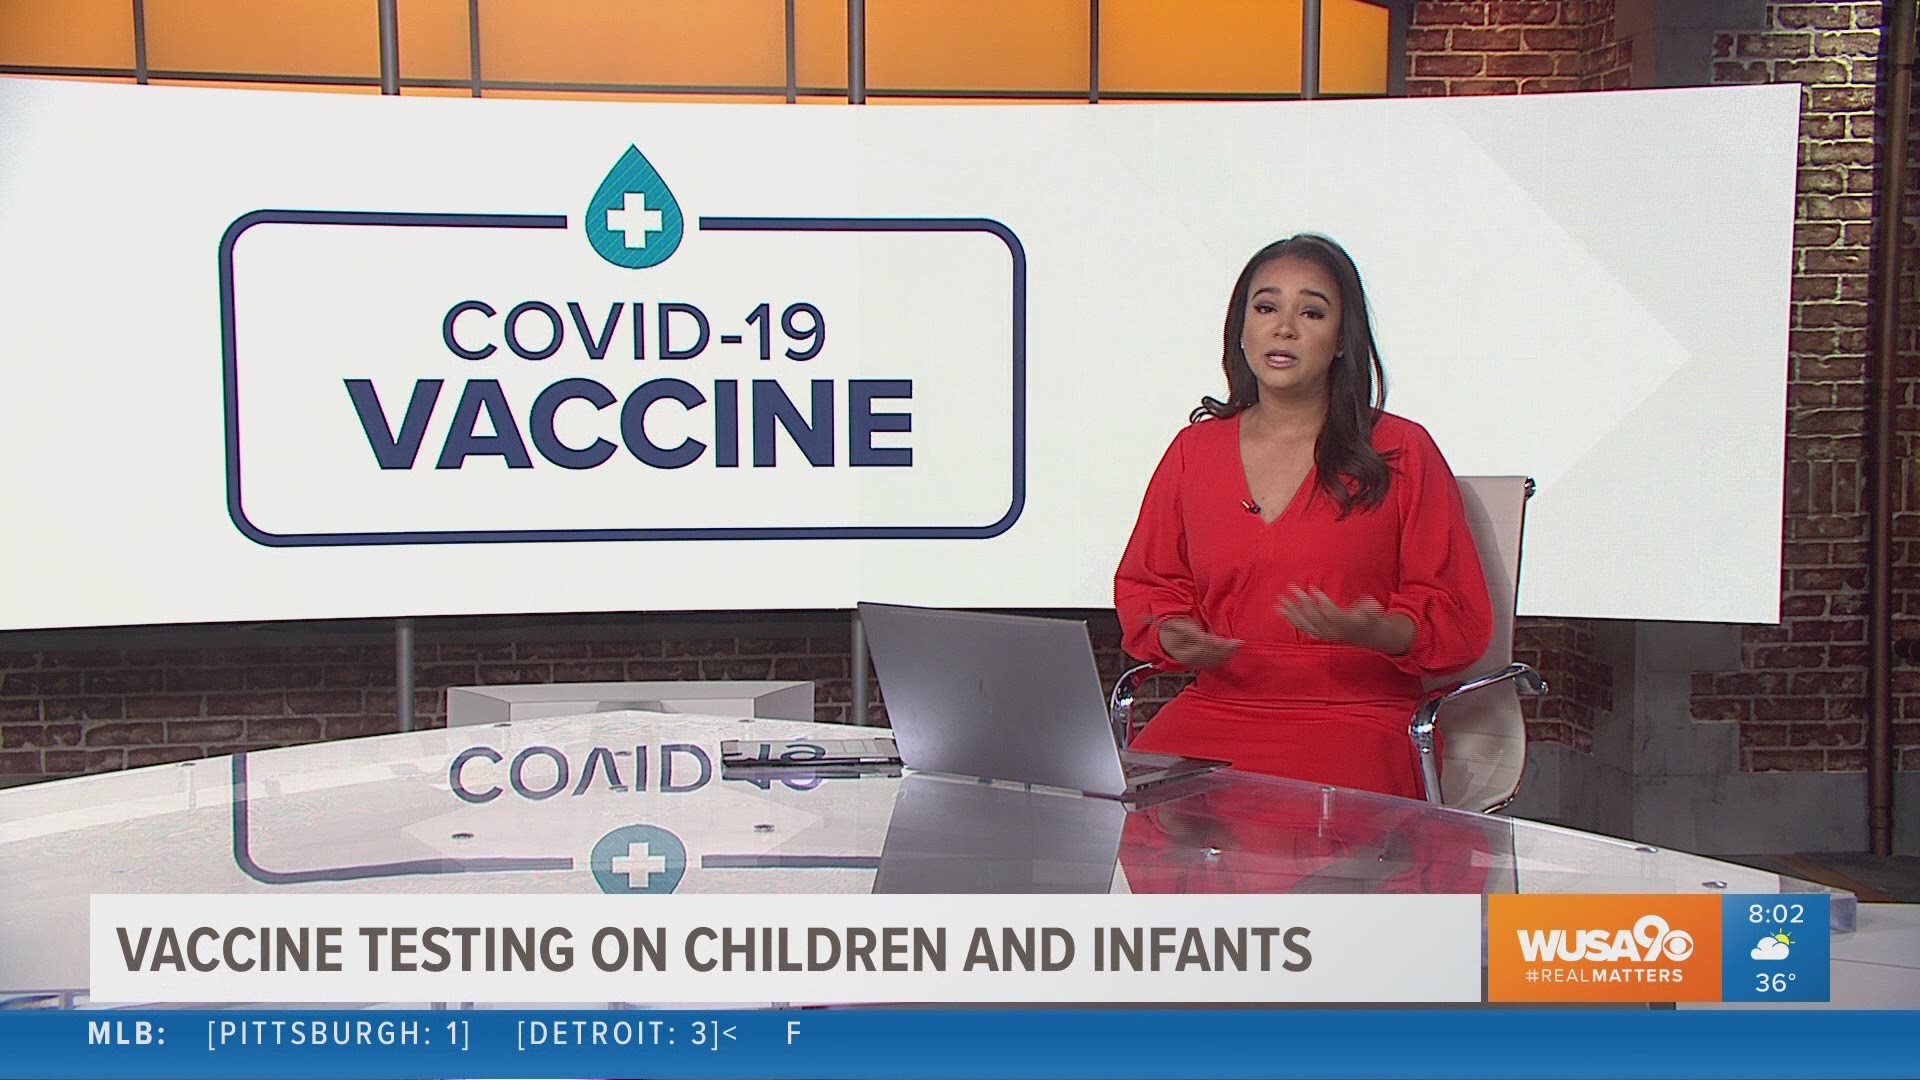 Dr. Bernhard Wiedermann says vaccinating children will be key to reaching herd immunity against COVID-19.